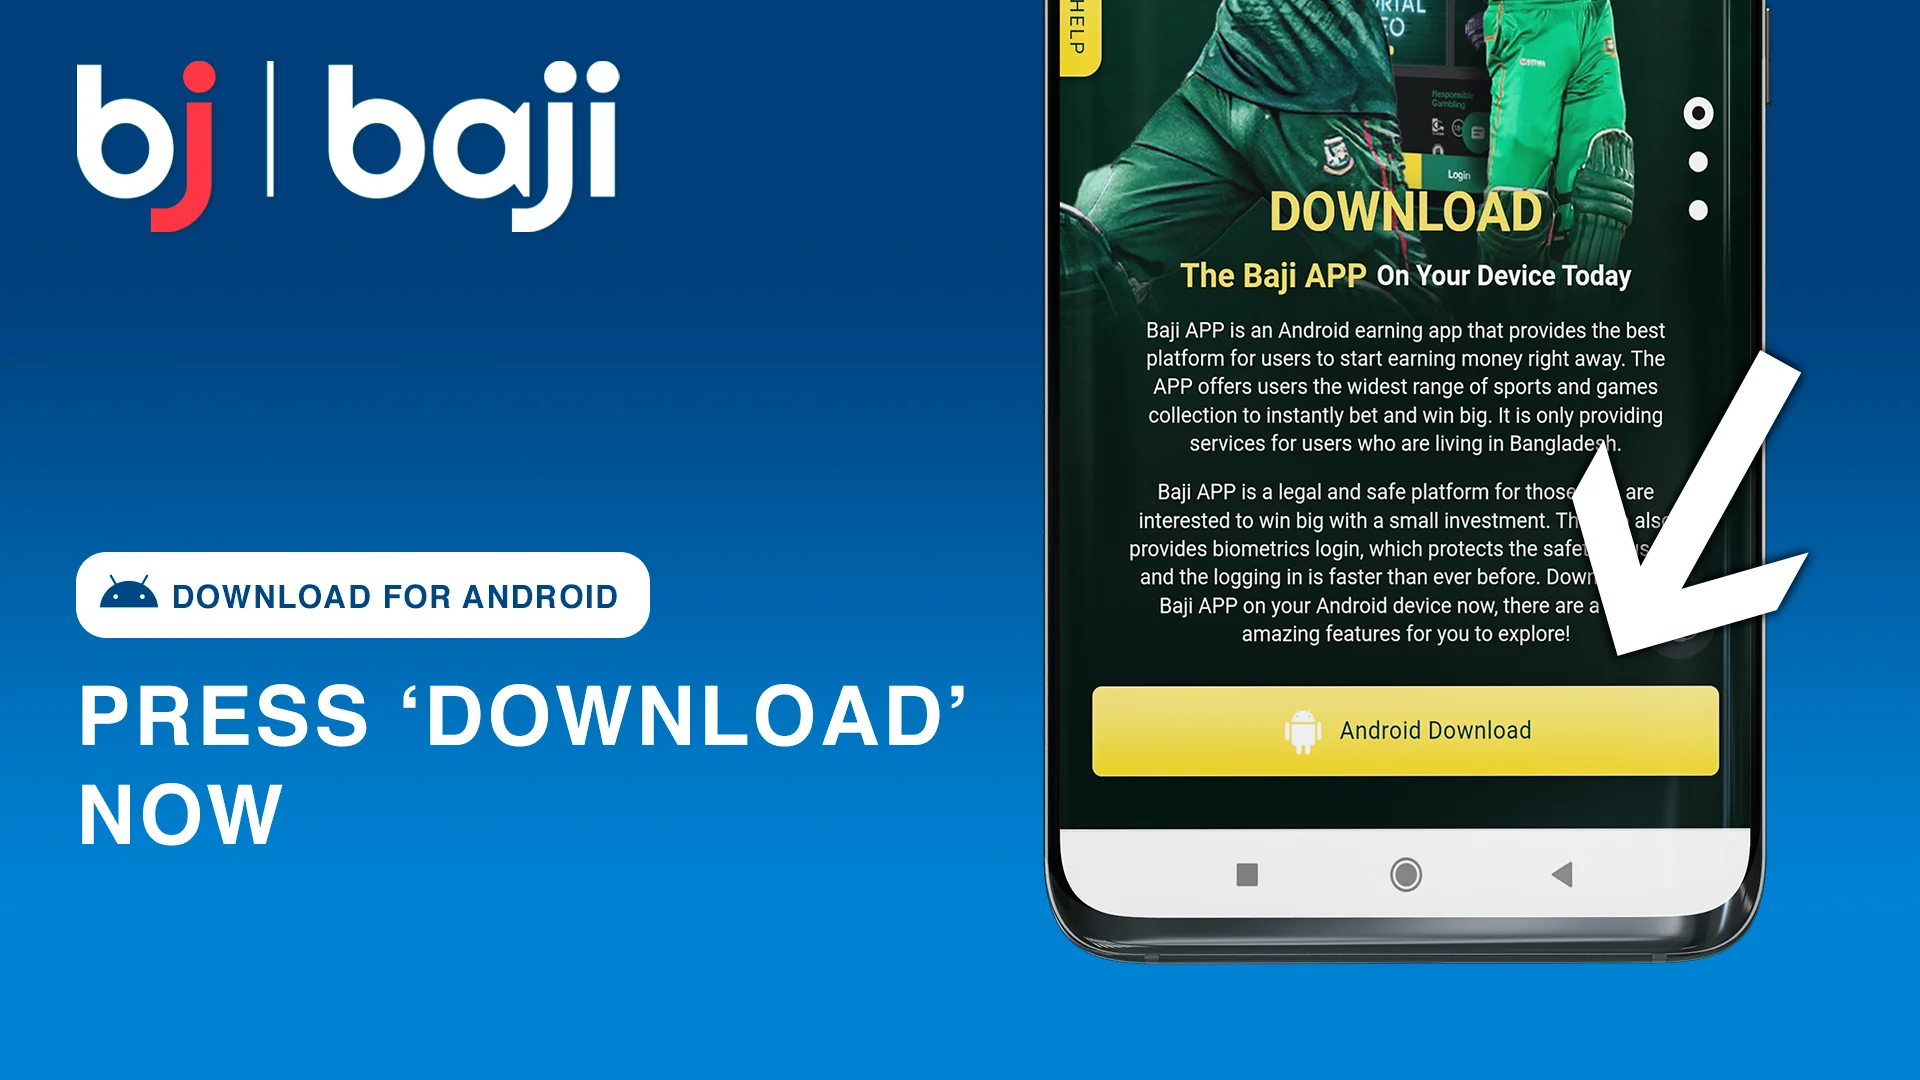 Press 'Download' button to start downloading Baji Android APK